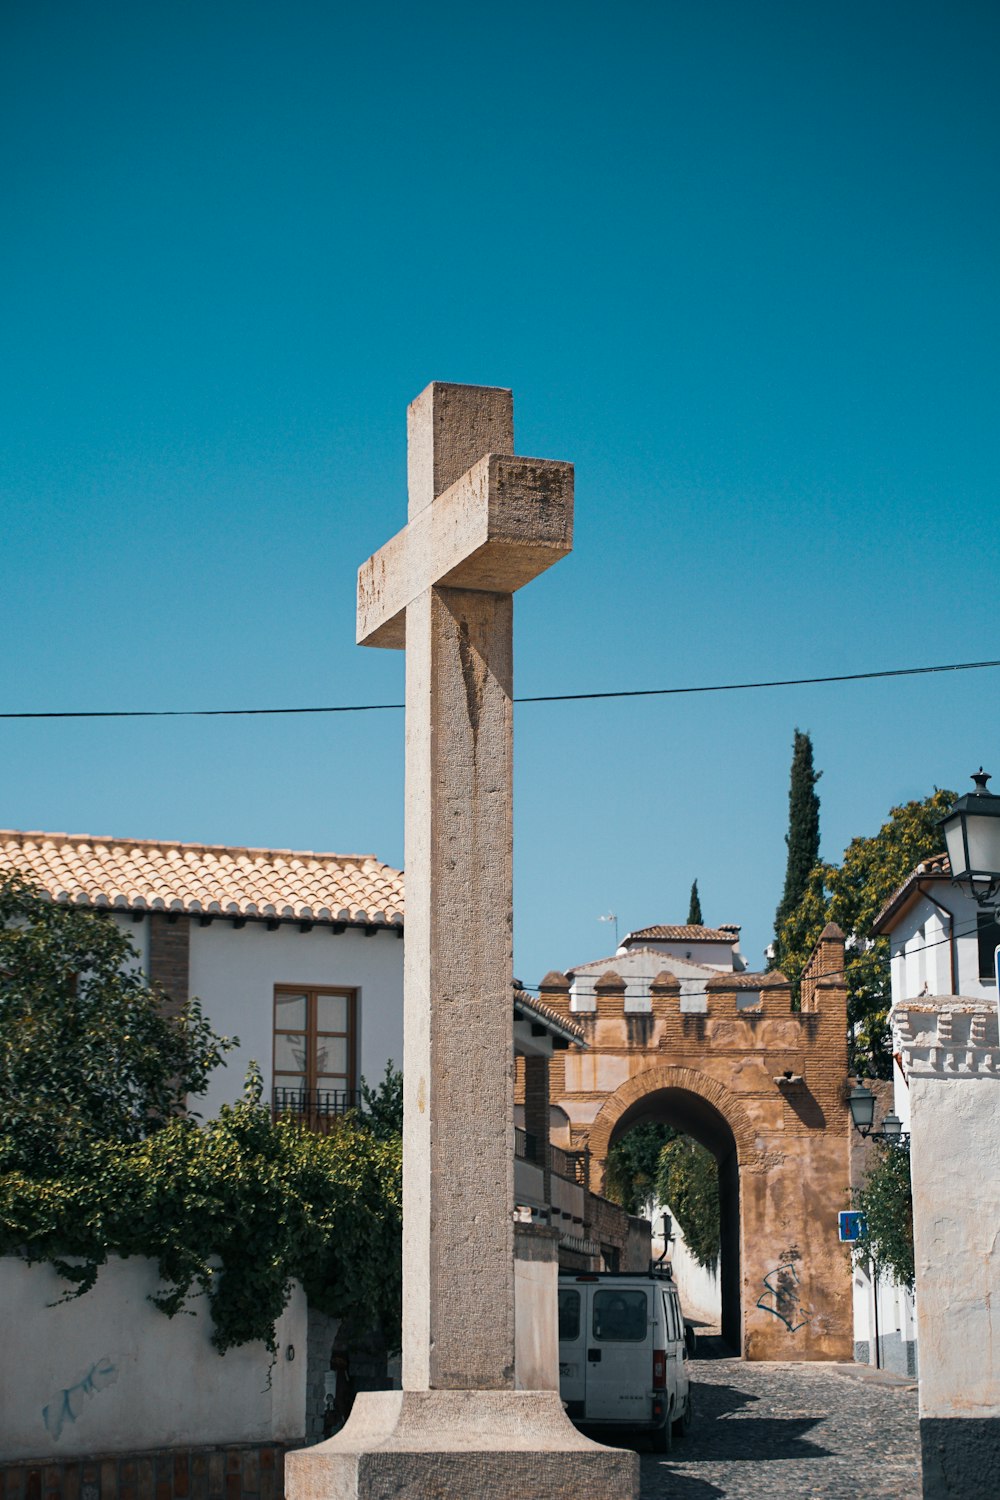 a cross on a stone pillar in the middle of a street